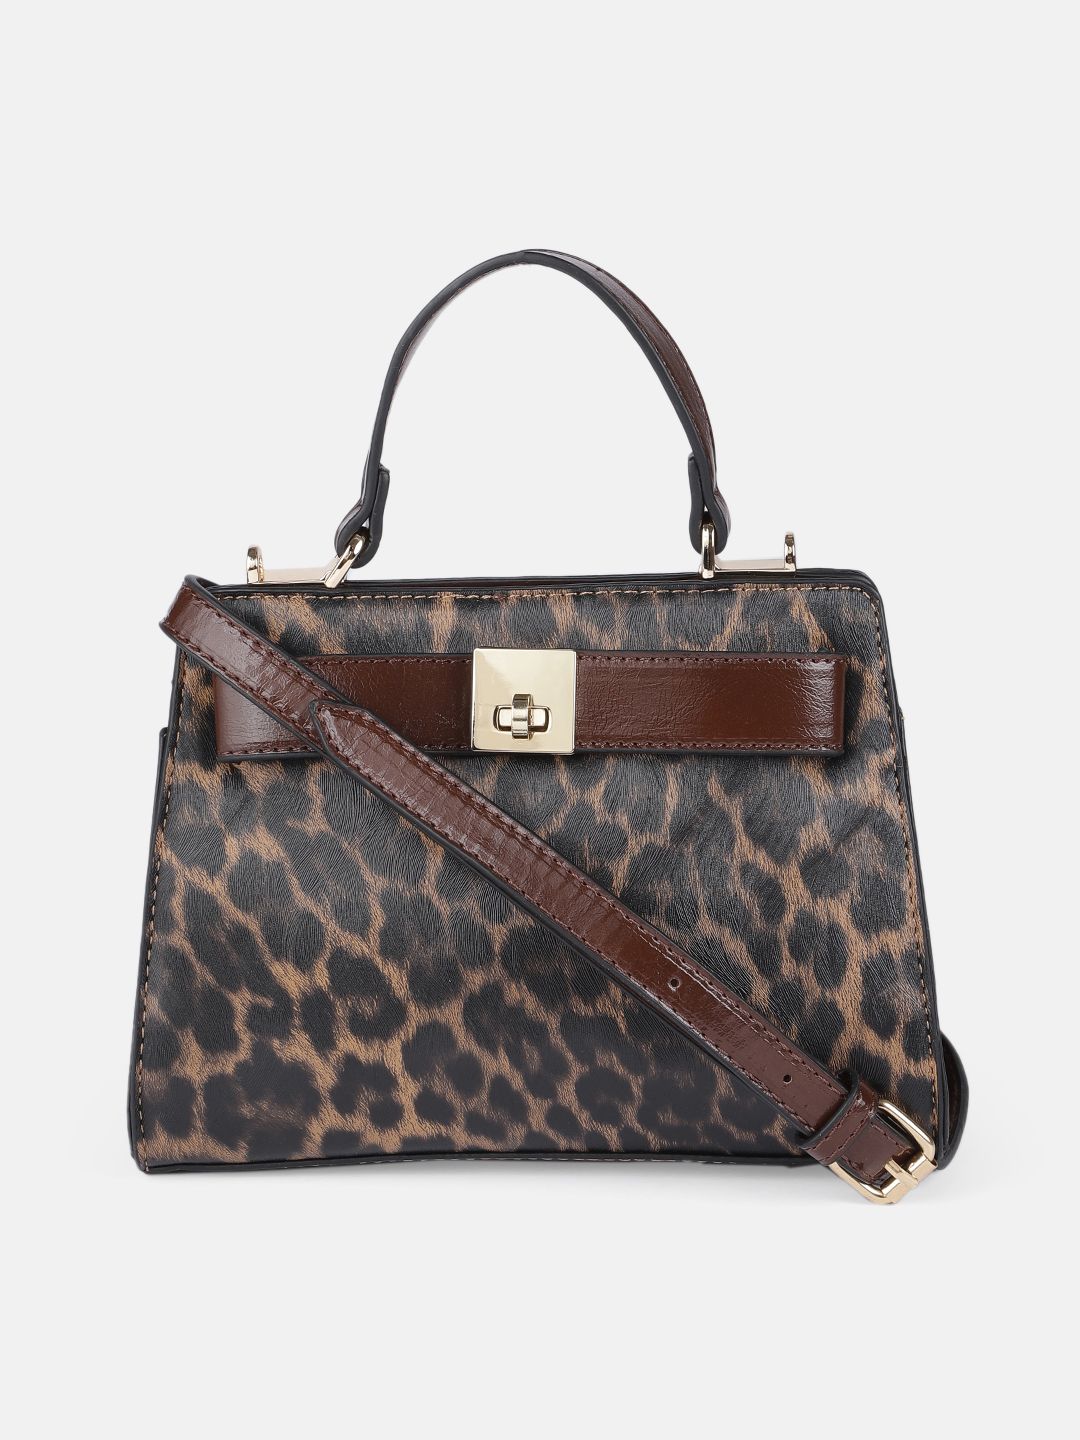 DressBerry Tan Brown Animal Textured Structured Handheld Bag Price in India